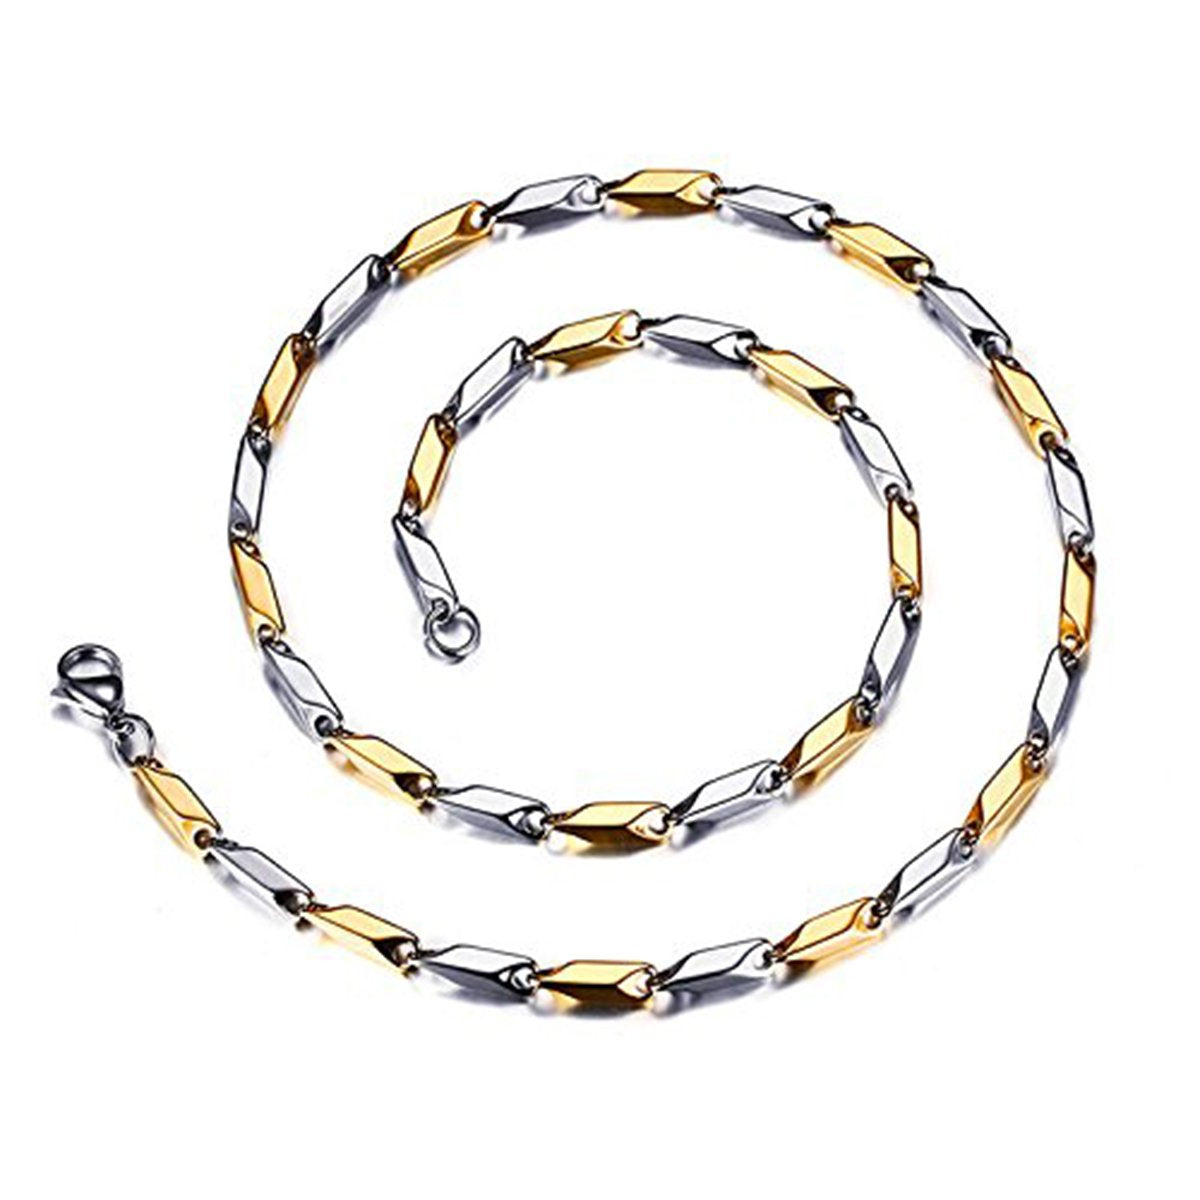 Italian 316L Stainless Steel Slim Light Weight Two Tone Chain Men 21"